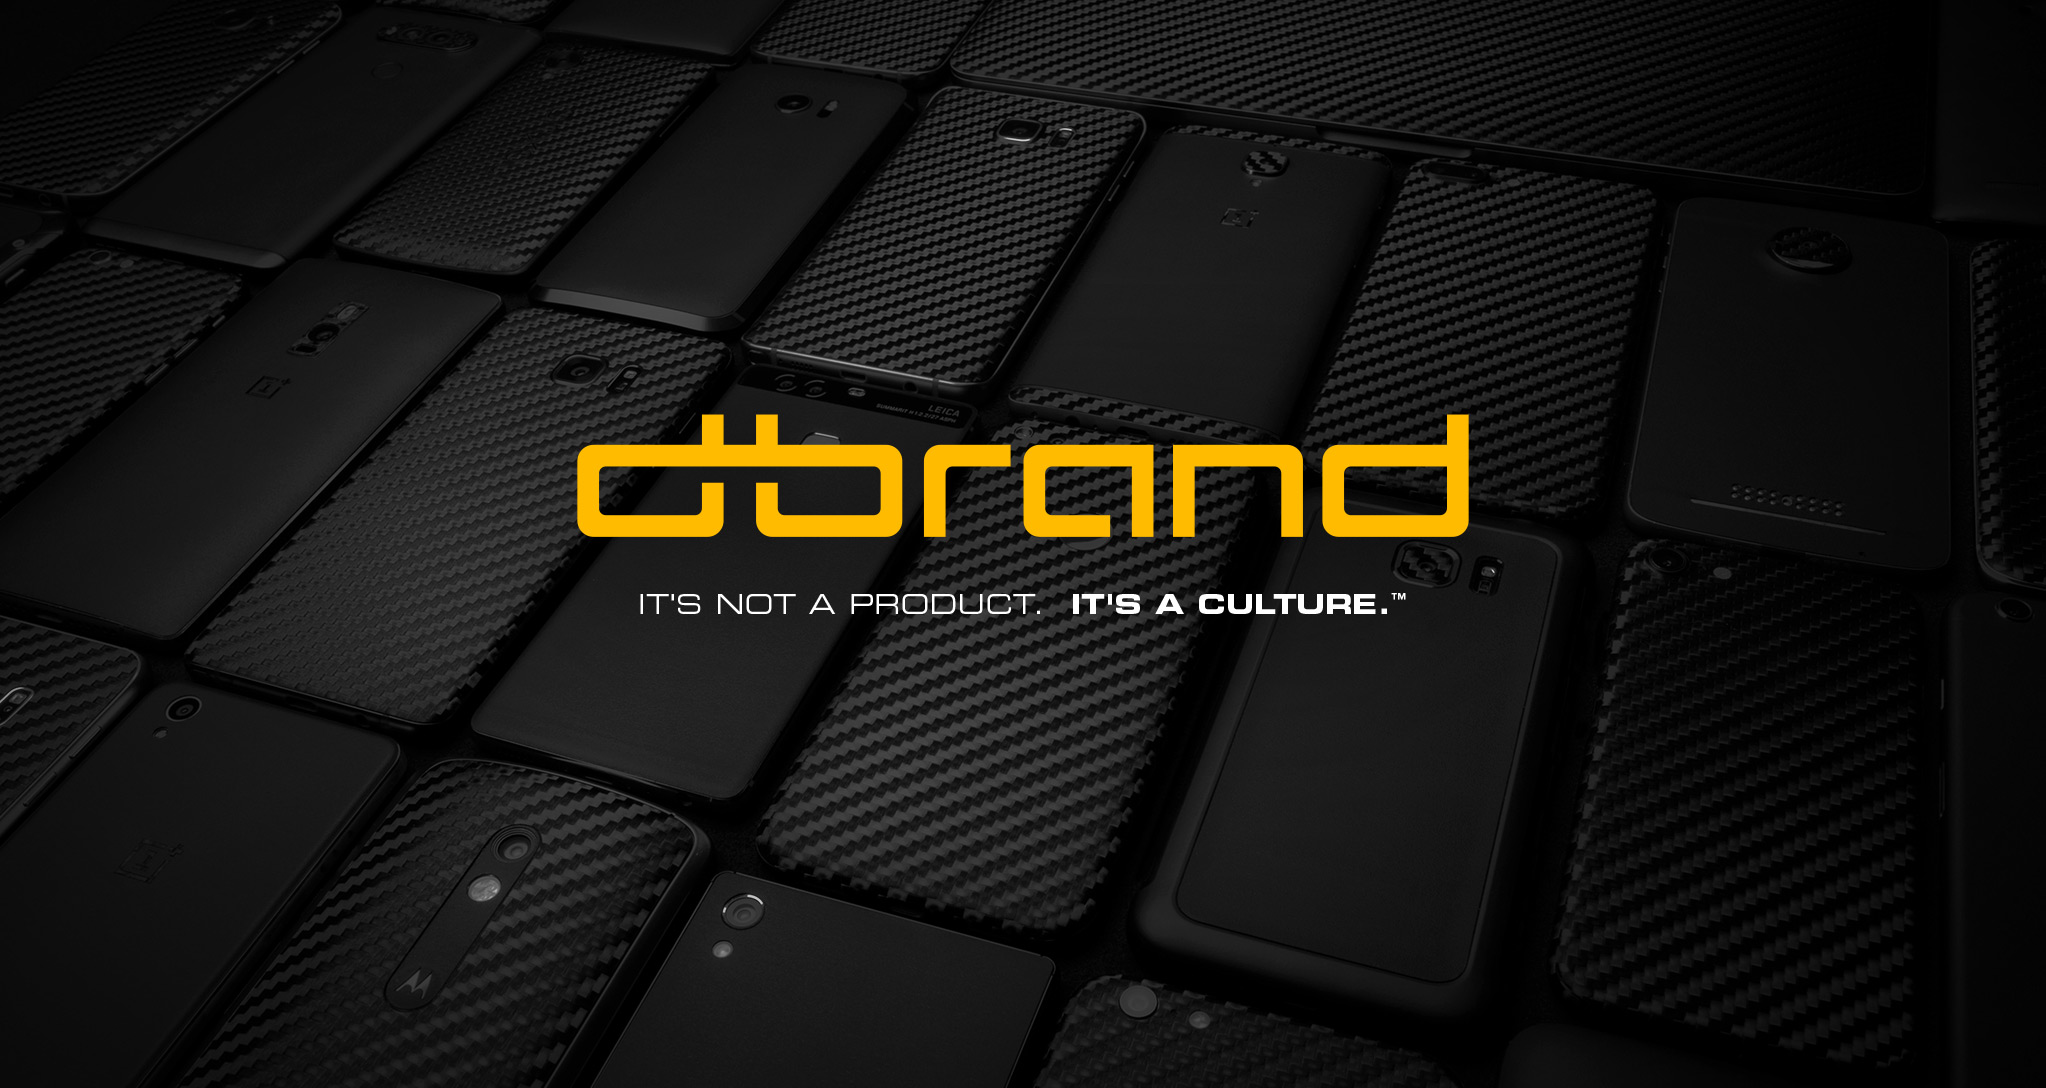 Dbrand has 15% off store with promo code through 3/24